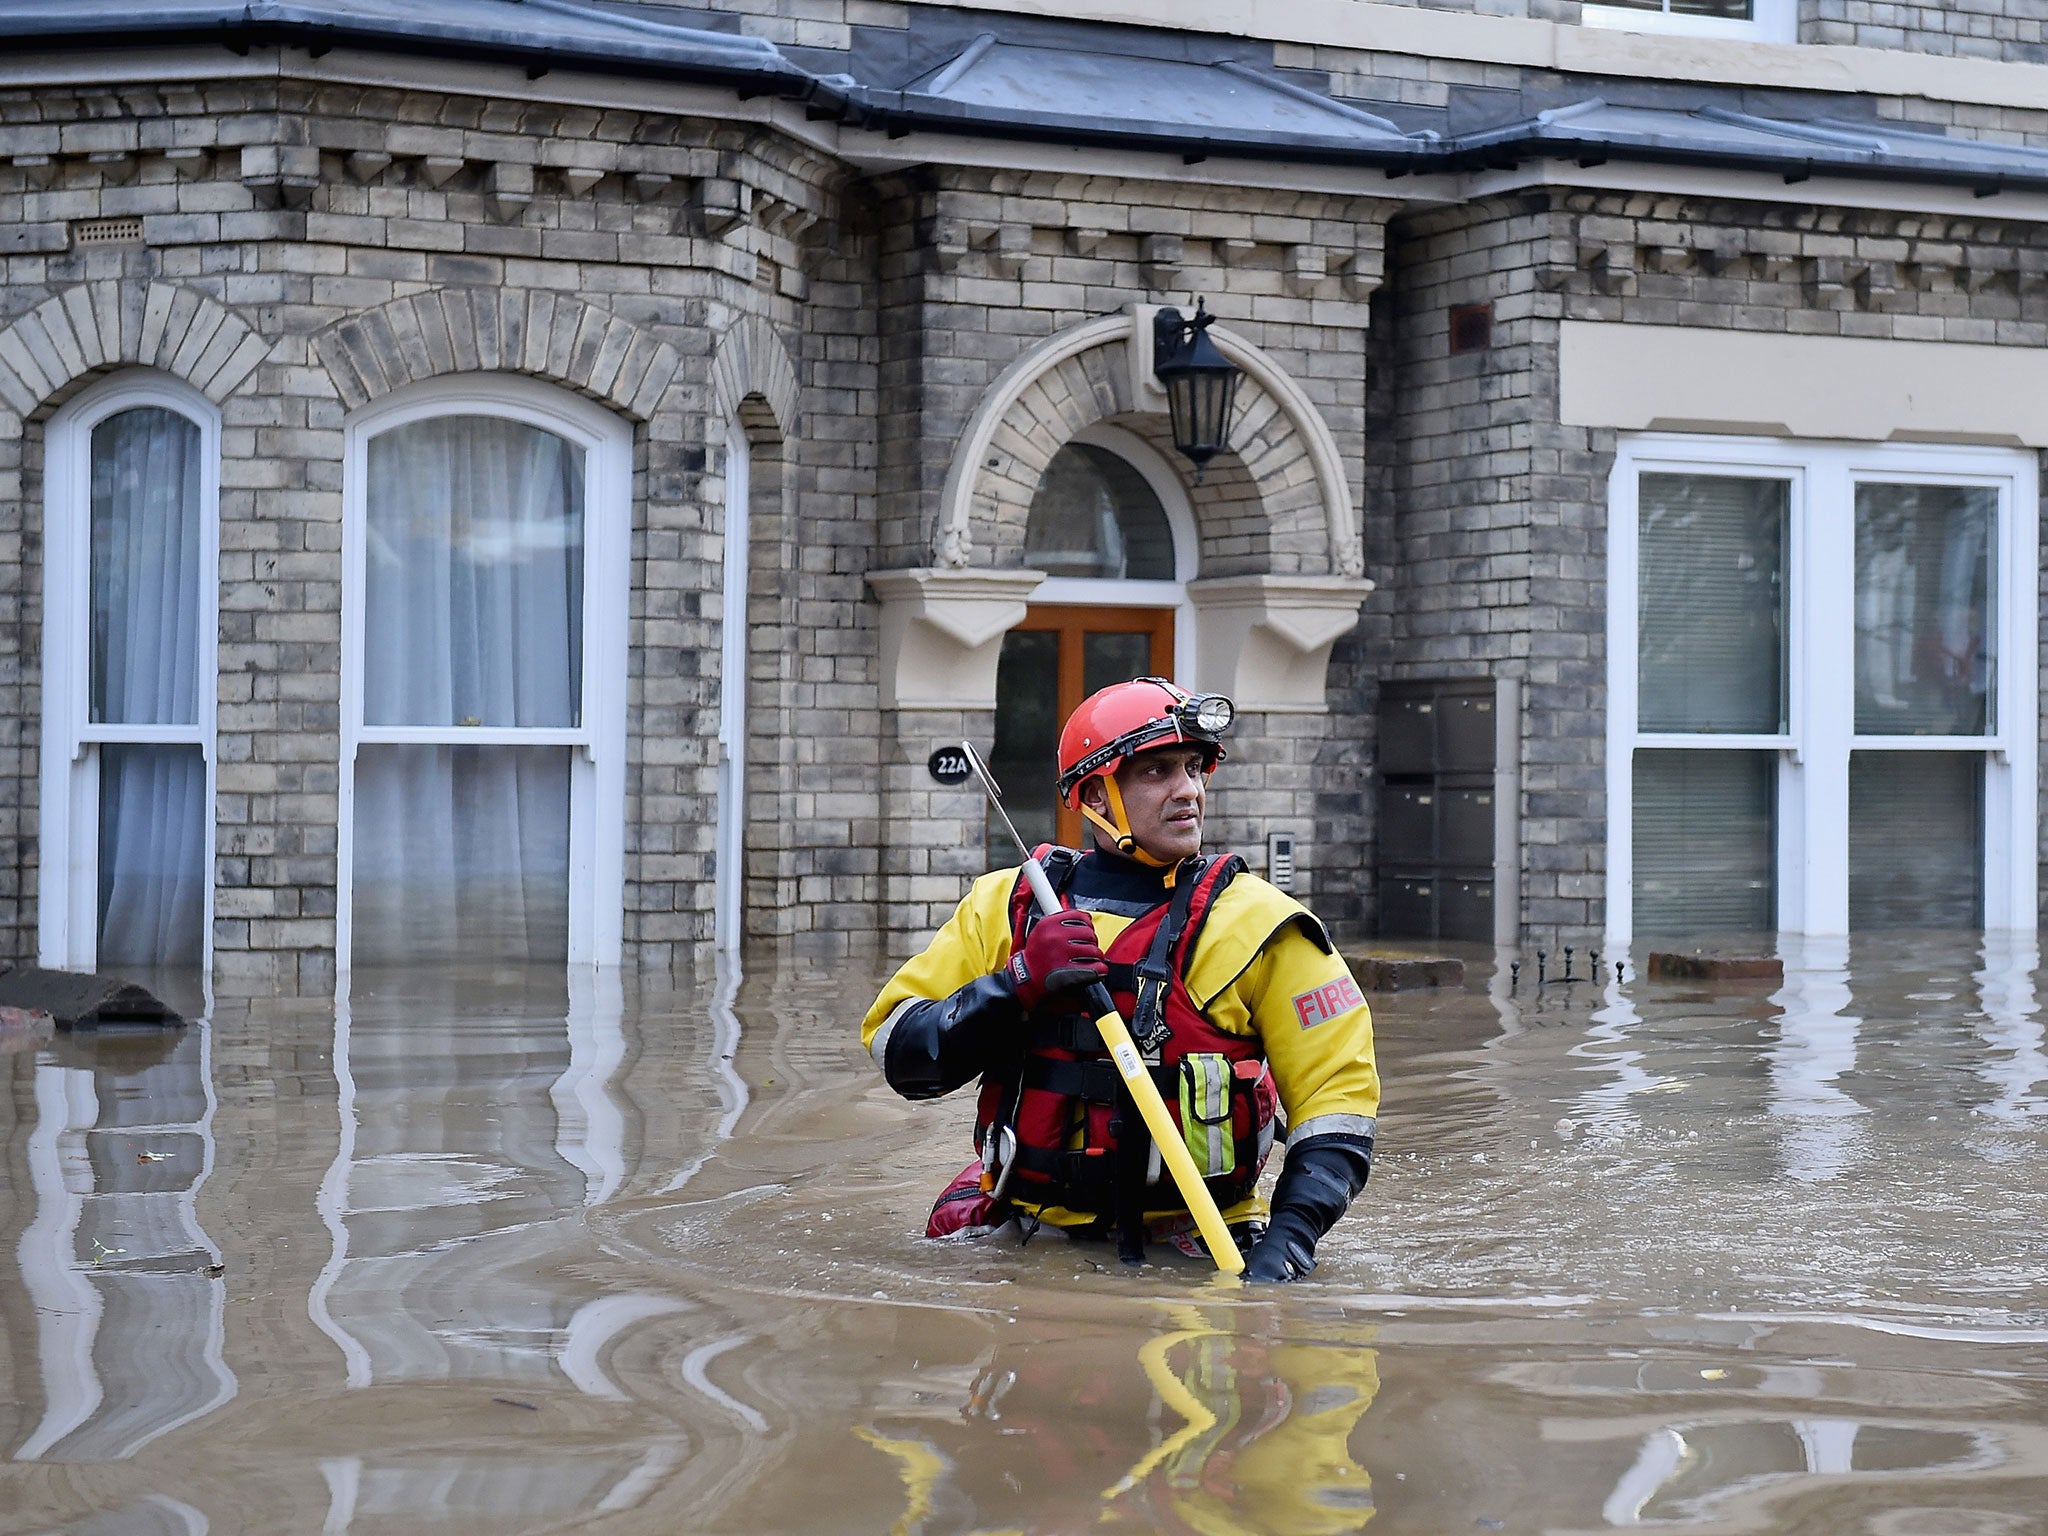 Rescue teams wade through flood waters that have inundated homes in the Huntington Road area of York after the River Foss burst its banks, on 28 December, 2015